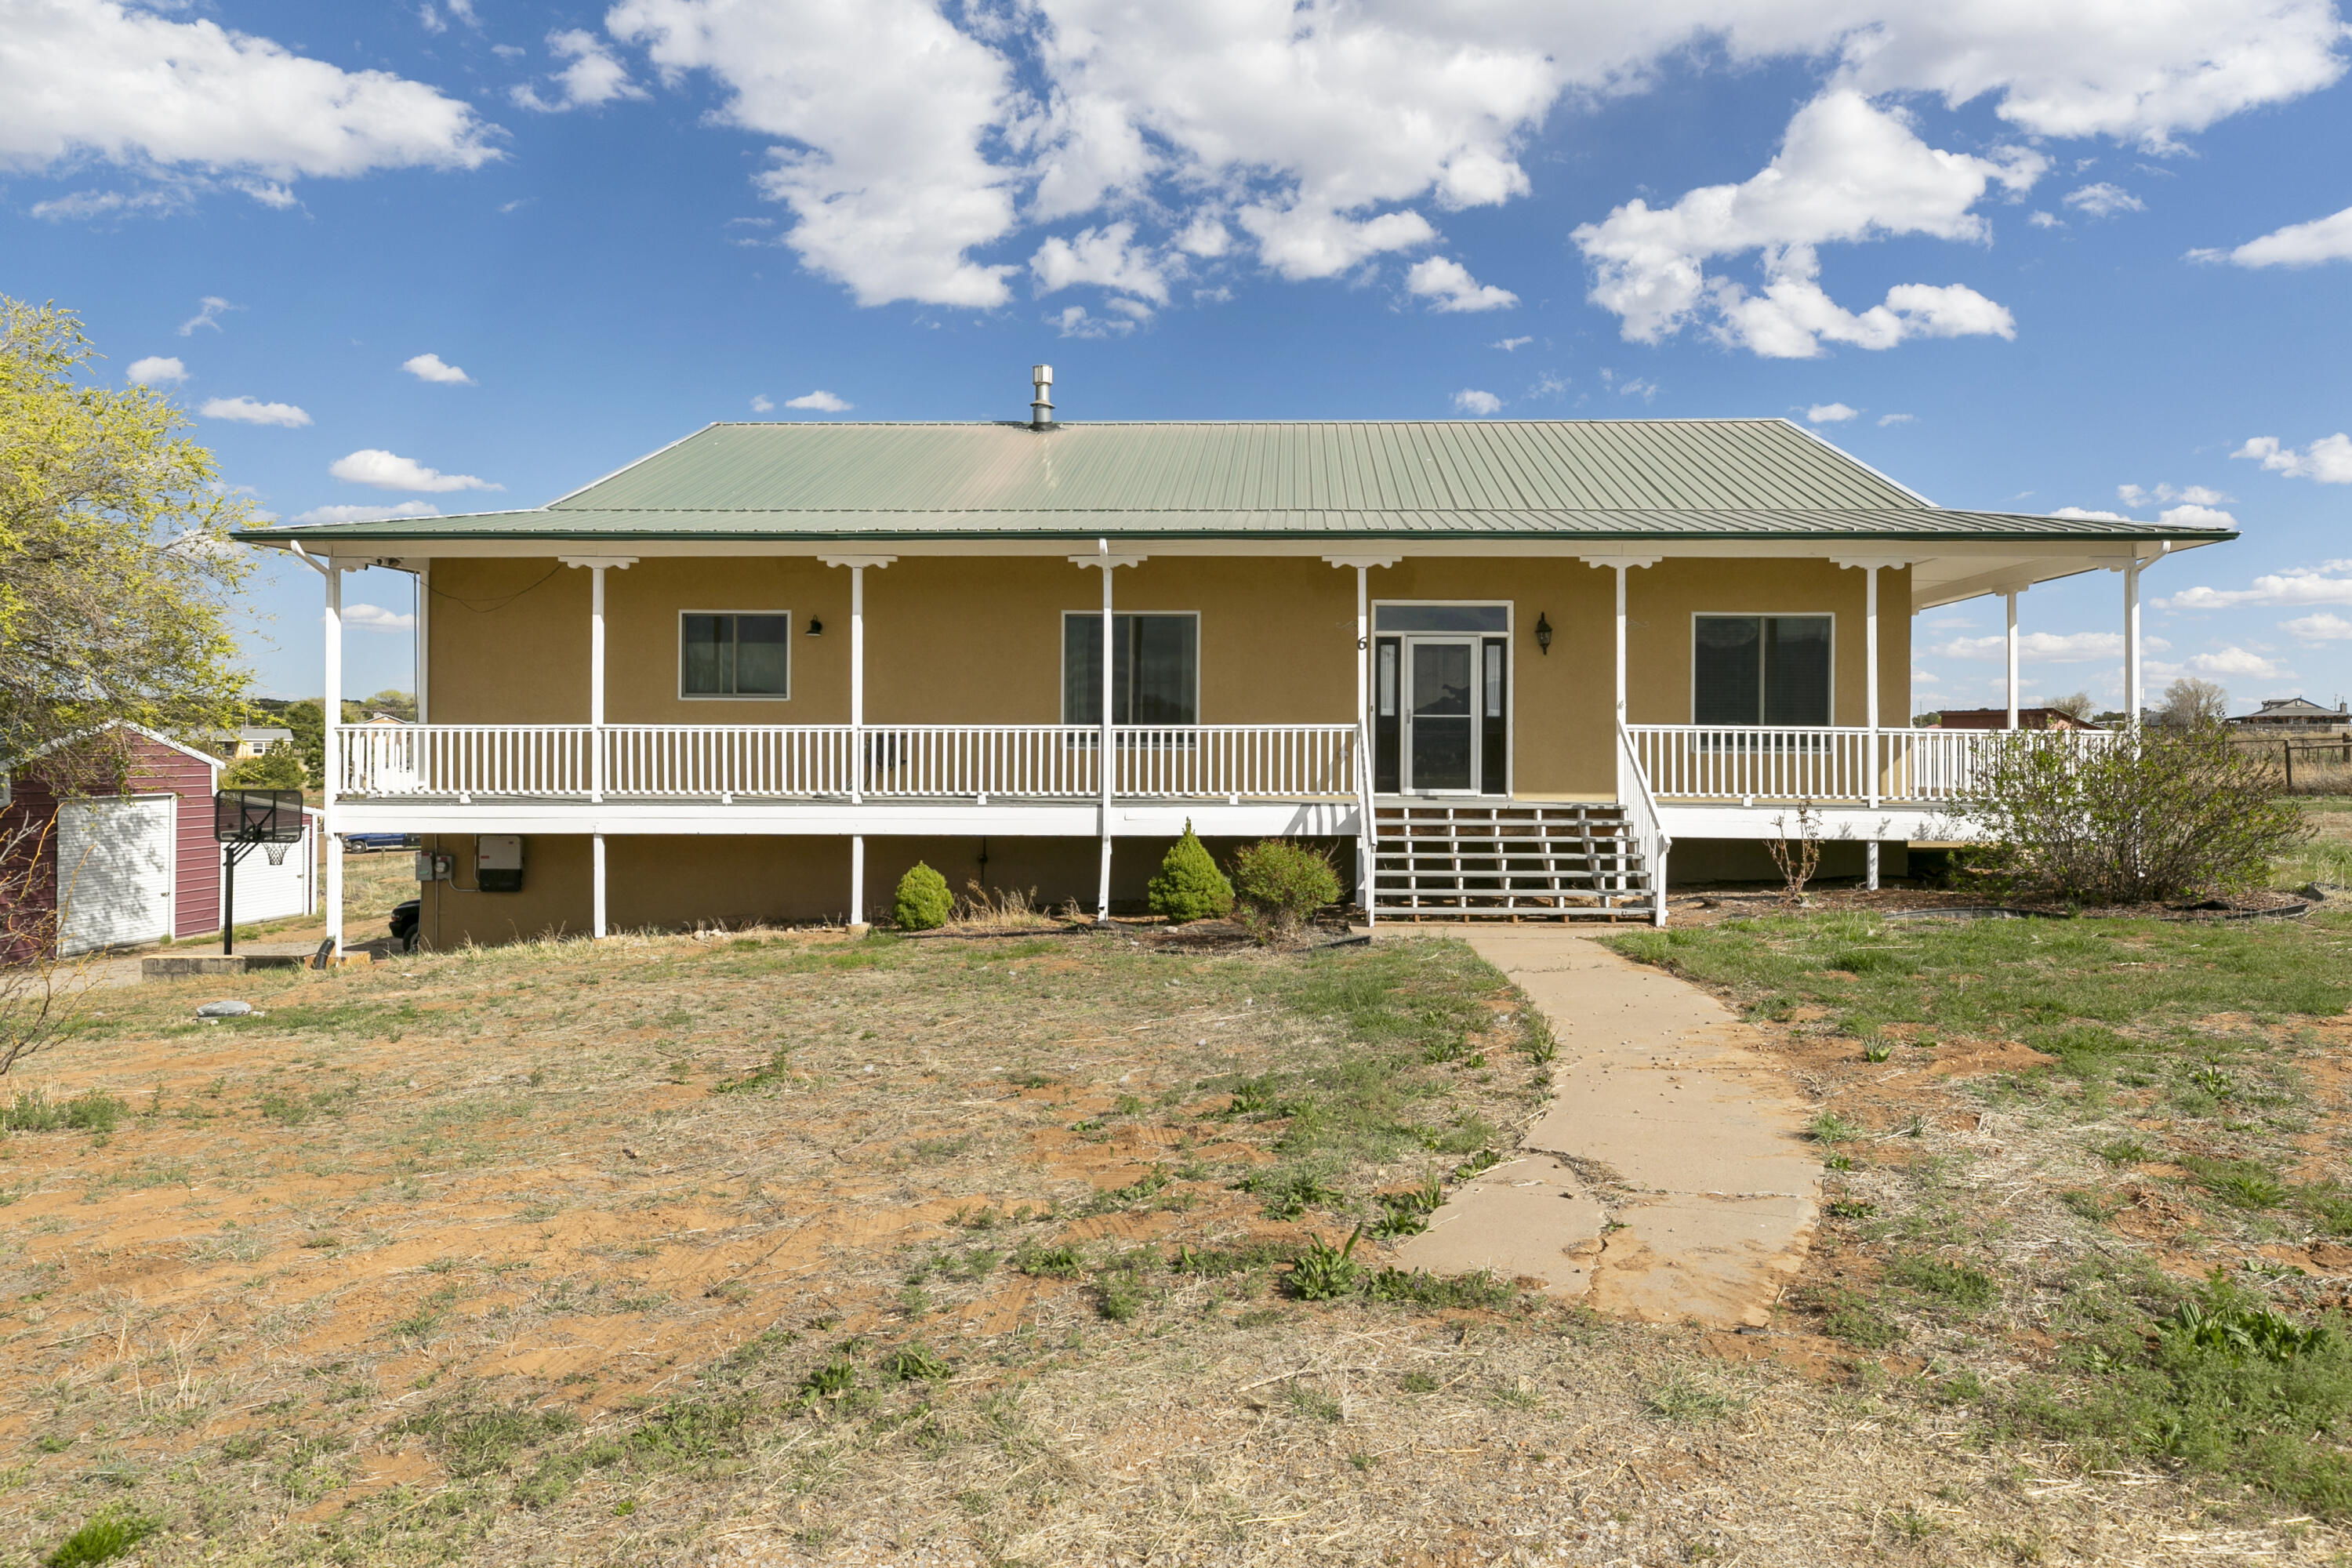 6 Revelation Place, Edgewood, New Mexico 87015, 5 Bedrooms Bedrooms, ,4 BathroomsBathrooms,Residential,For Sale,6 Revelation Place,1062224